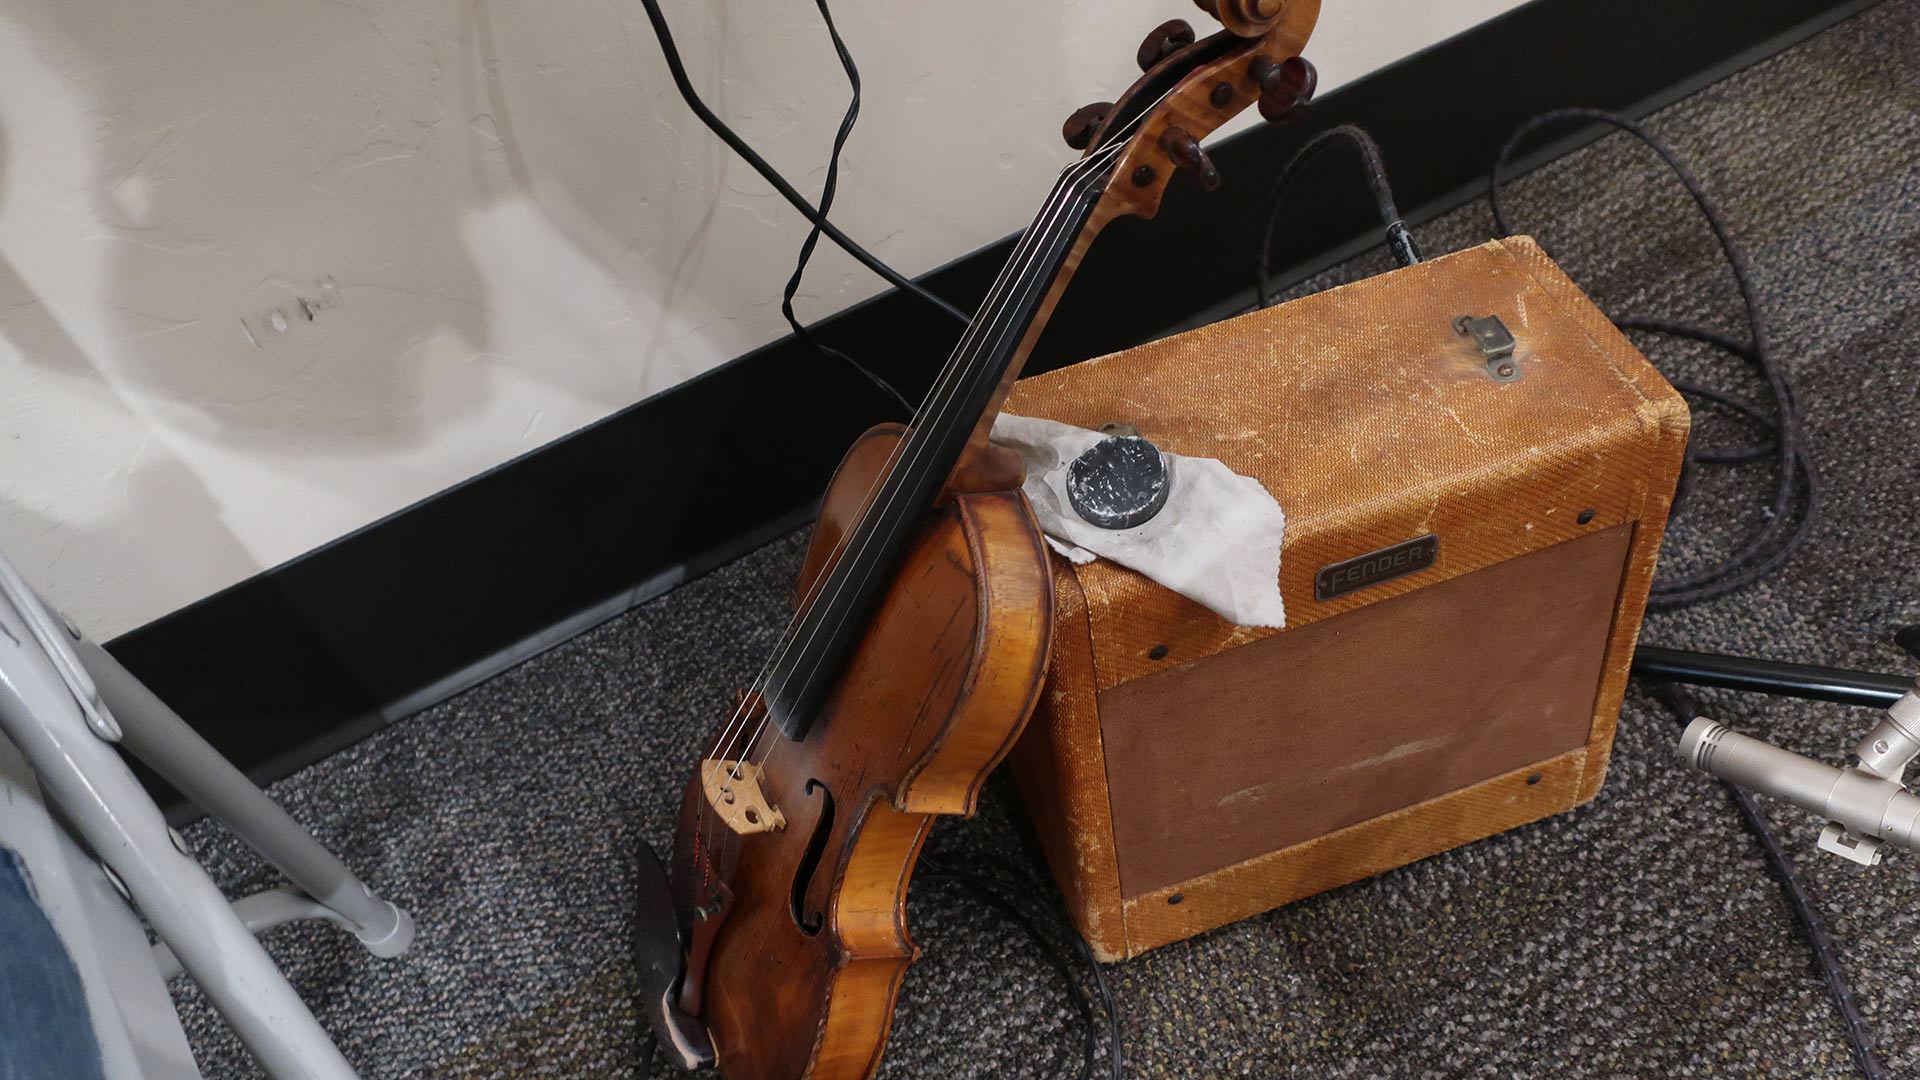 Heather Hardy's violin, which was crafted in 1799.